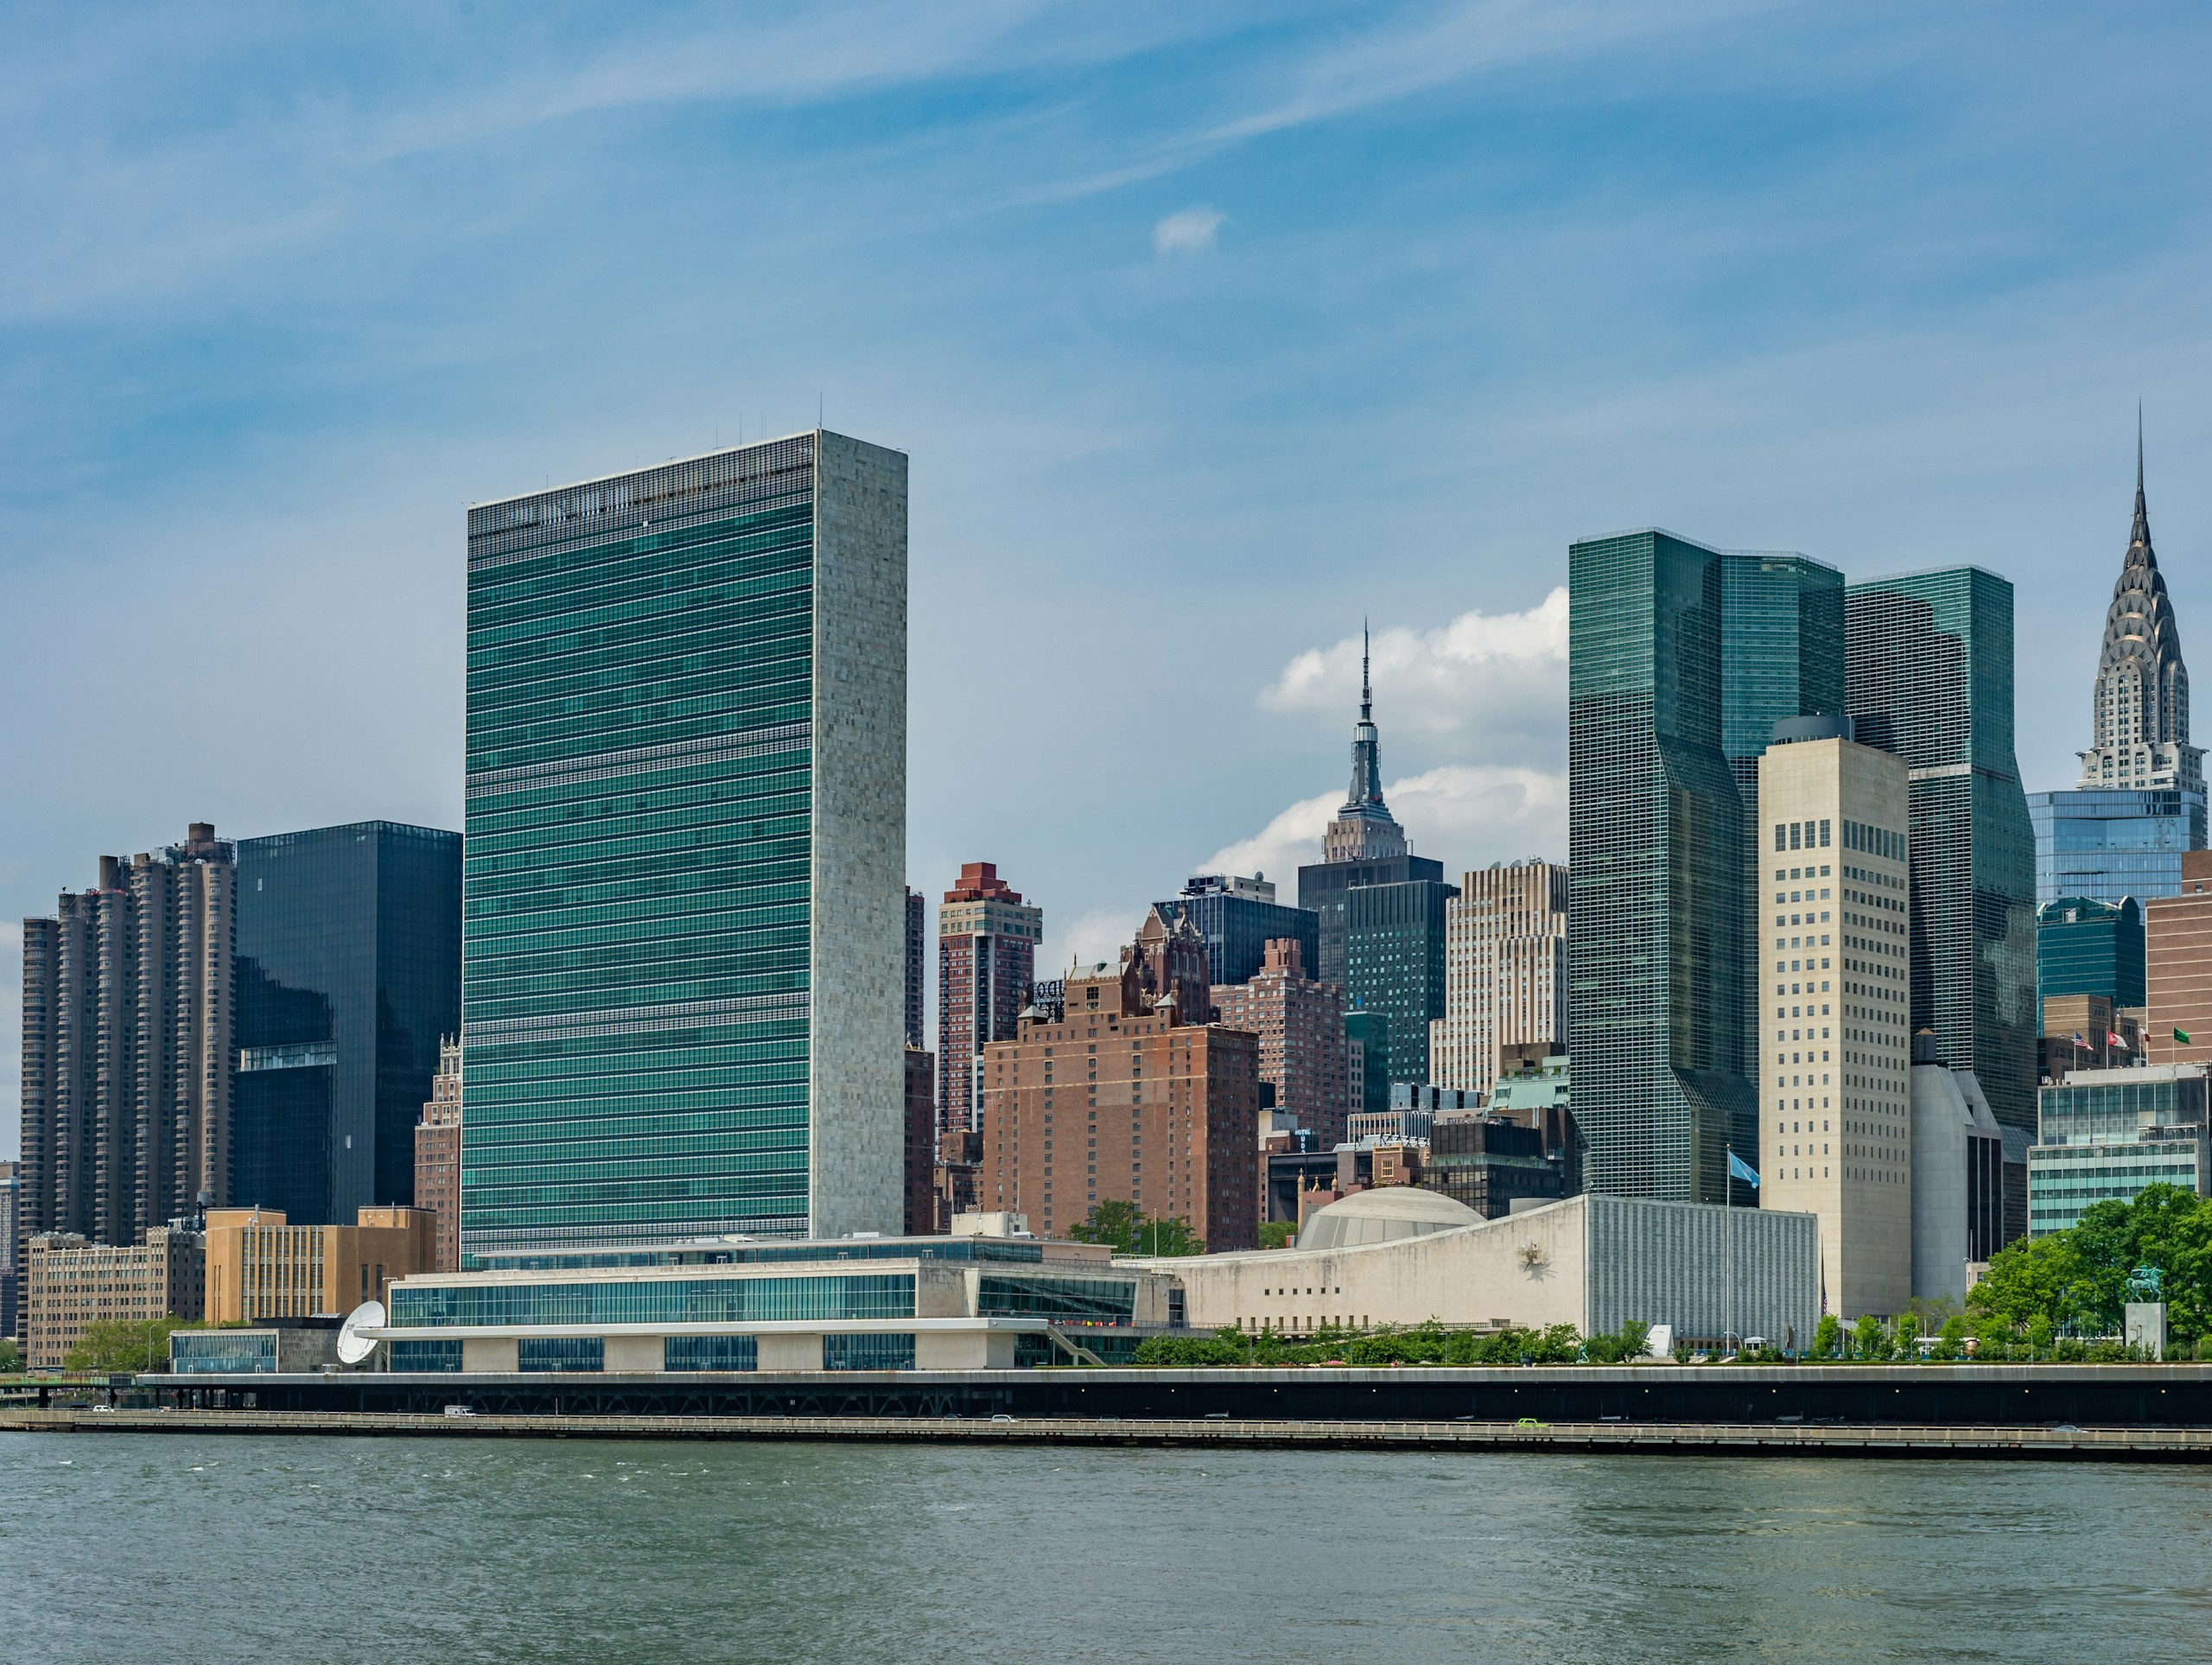 A rare view of the Manhattan skyline from Roosevelt Island, with the United Nations building in the foreground and the Empire State and Chrysler buildings visible. 